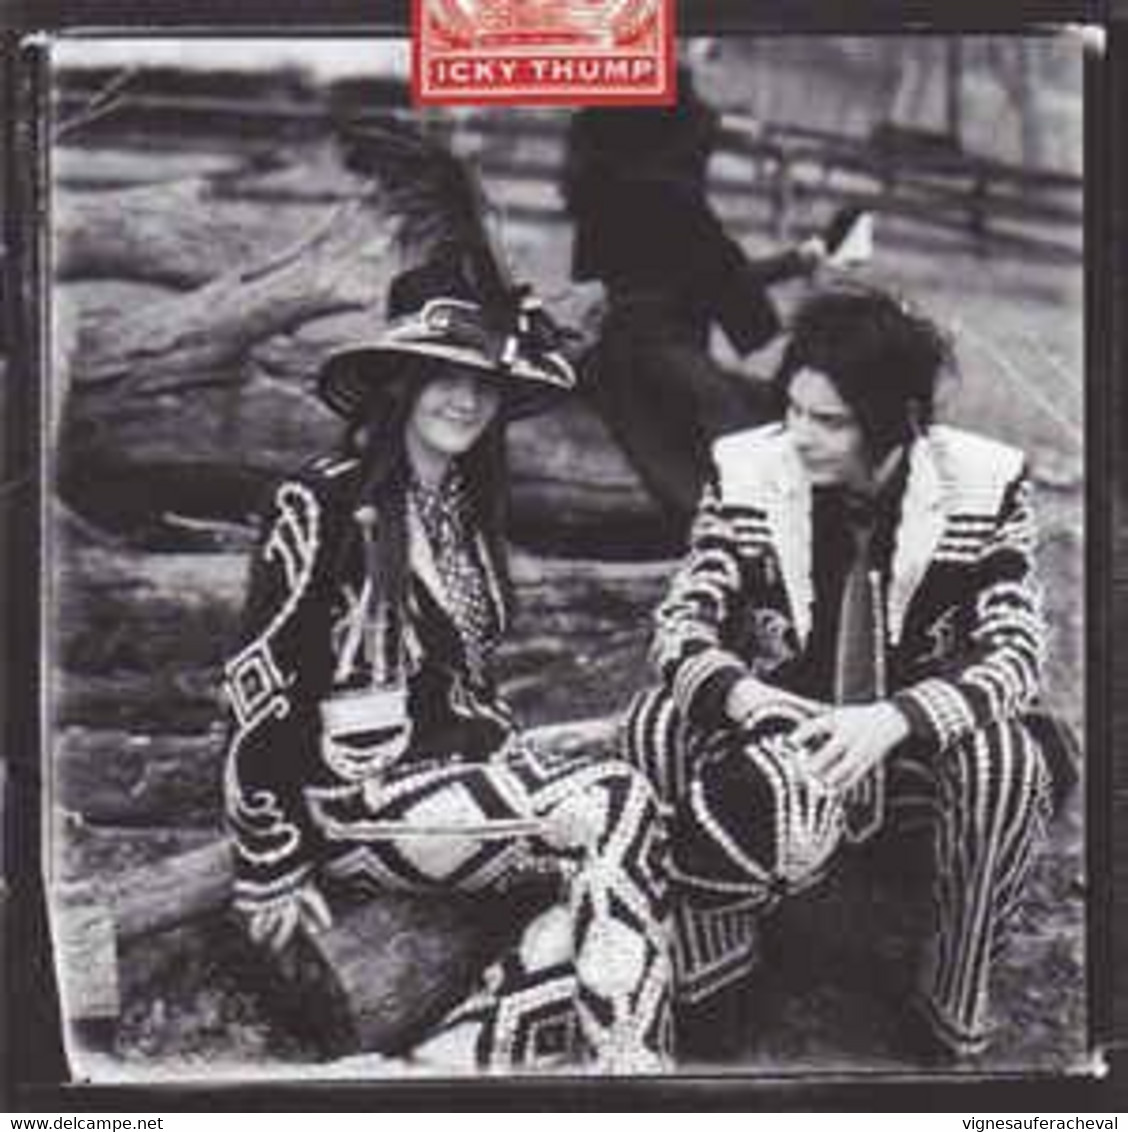 The White Stripes - Icky Thump Cd - Sonstige - Englische Musik